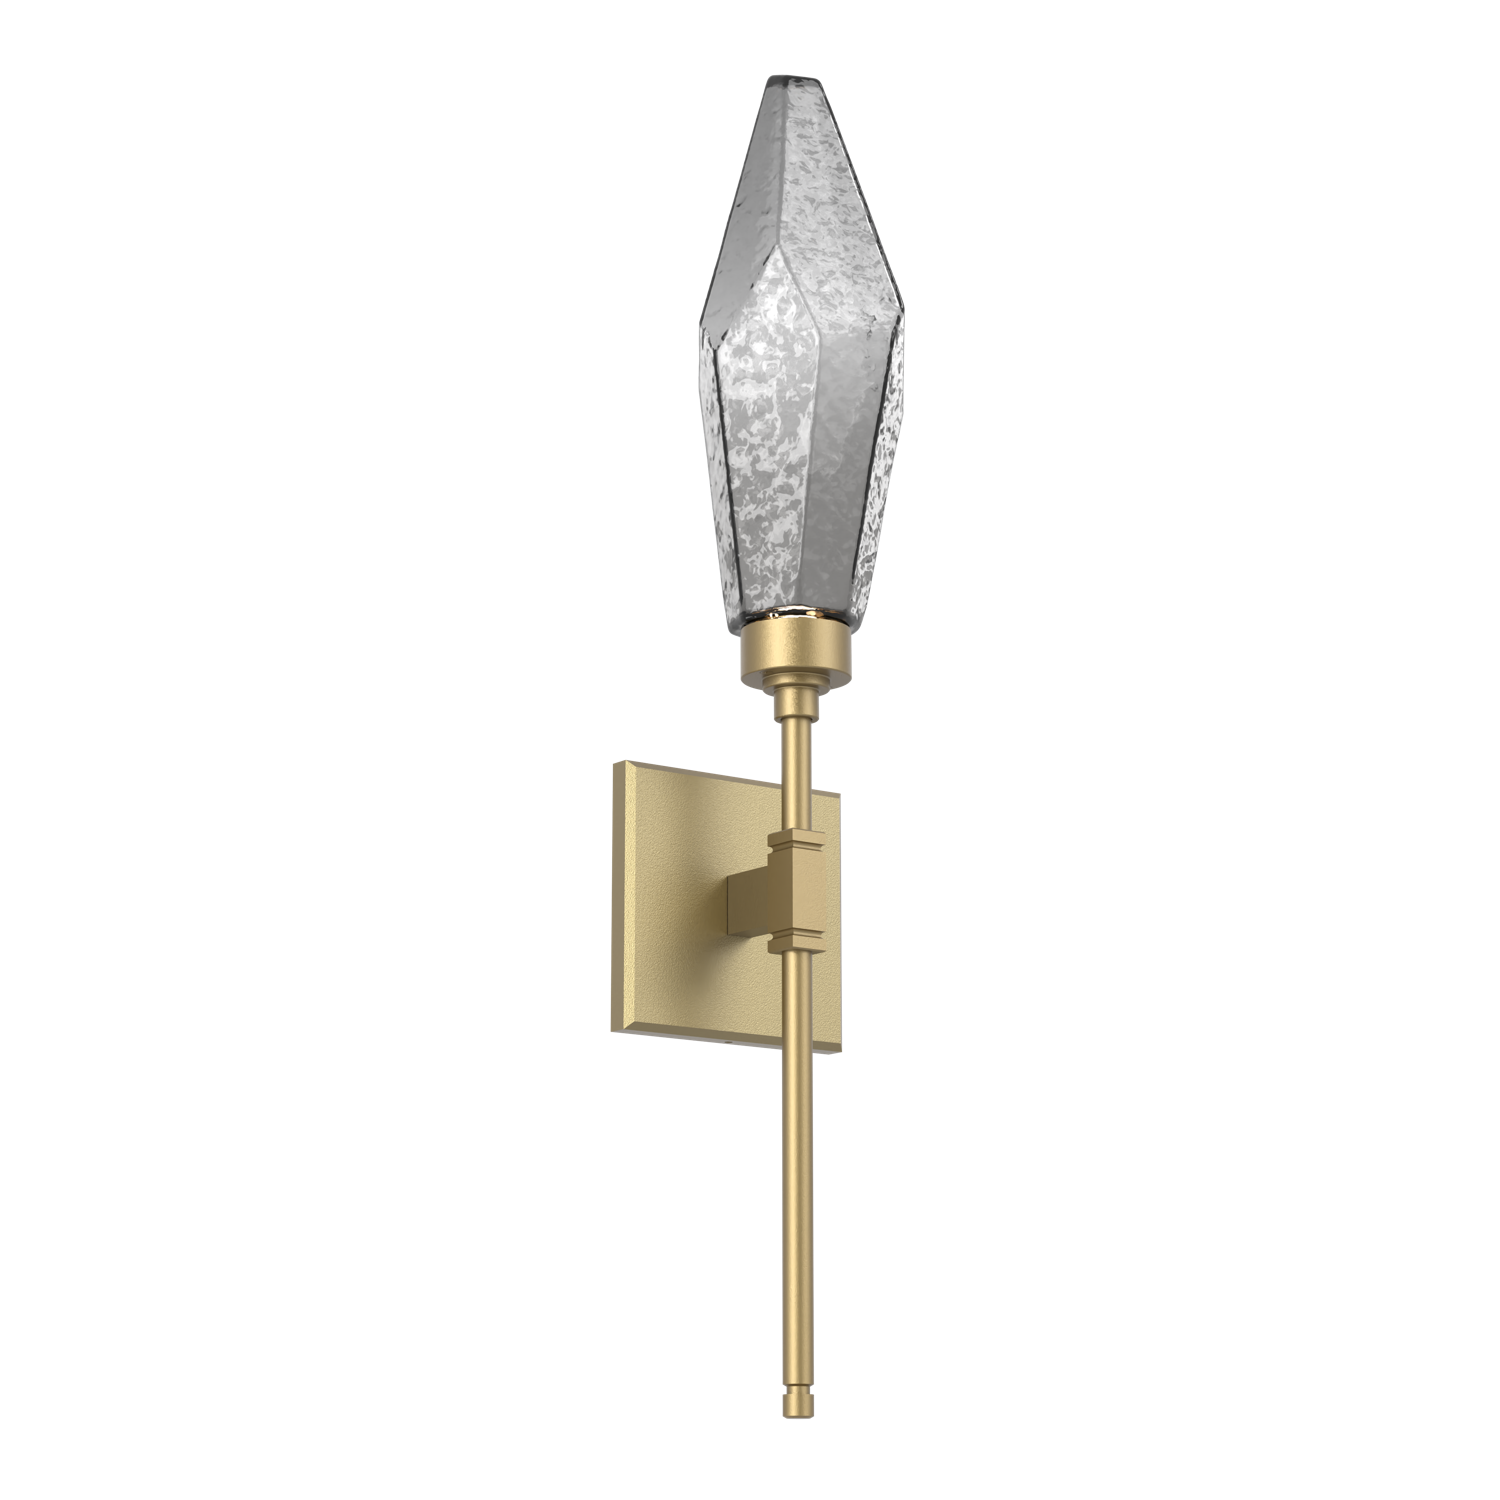 IDB0050-04-GB-CS-Hammerton-Studio-Rock-Crystal-ada-certified-belvedere-wall-sconce-with-gilded-brass-finish-and-chilled-smoke-glass-shades-and-LED-lamping